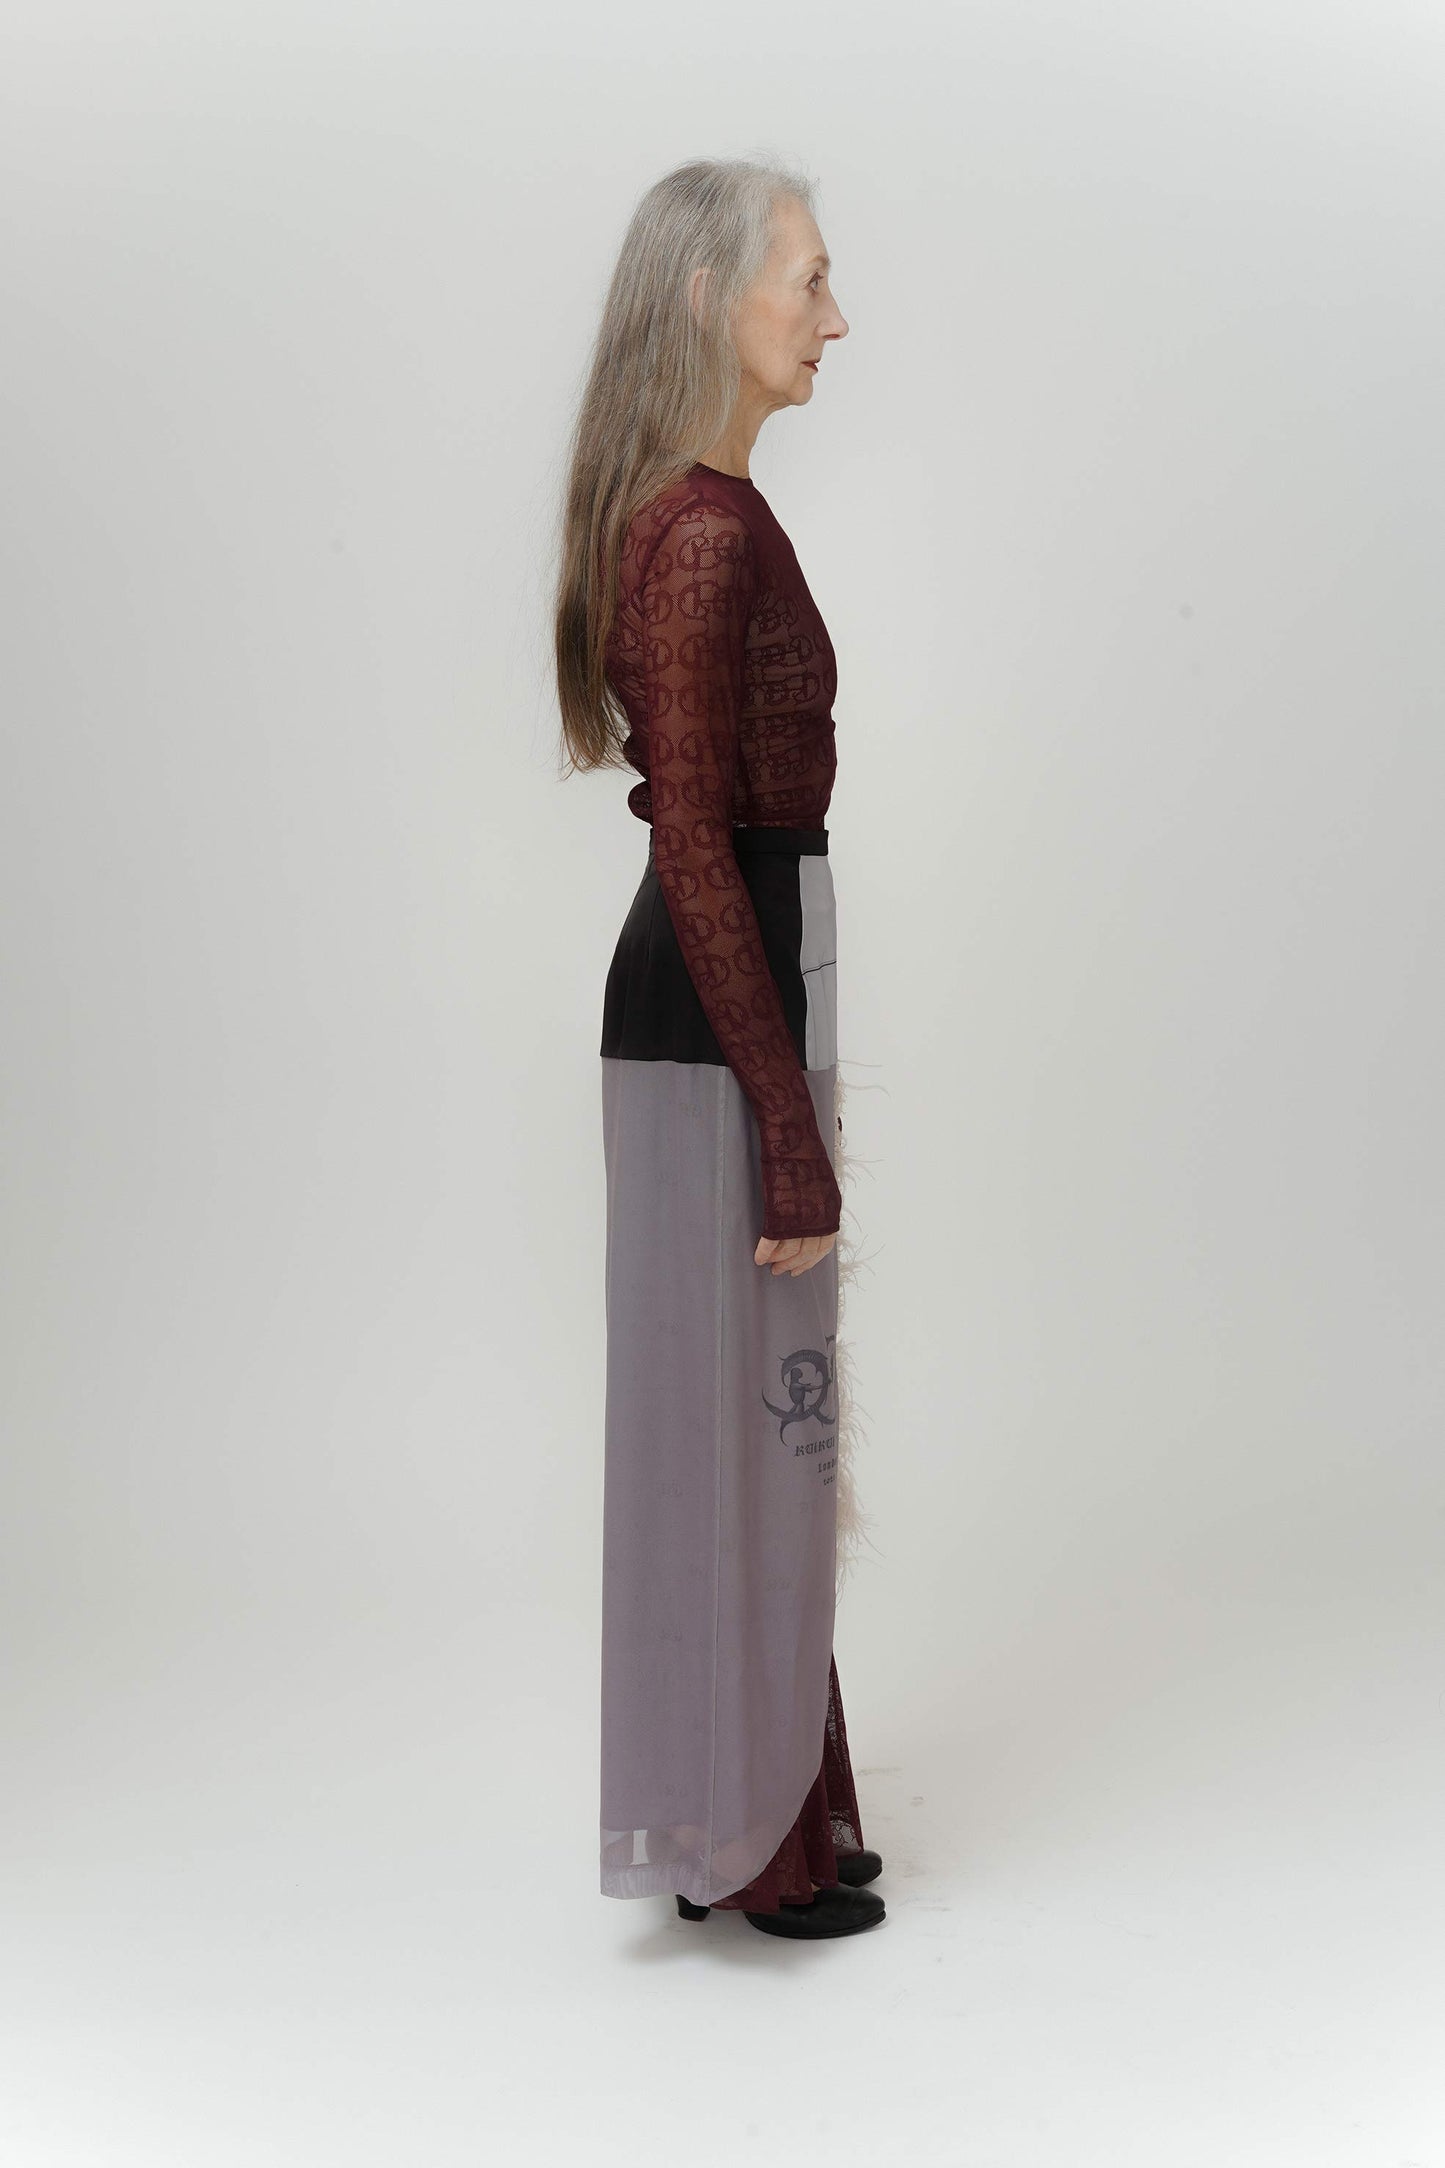 Hand-stitched Draping Lace Skirt